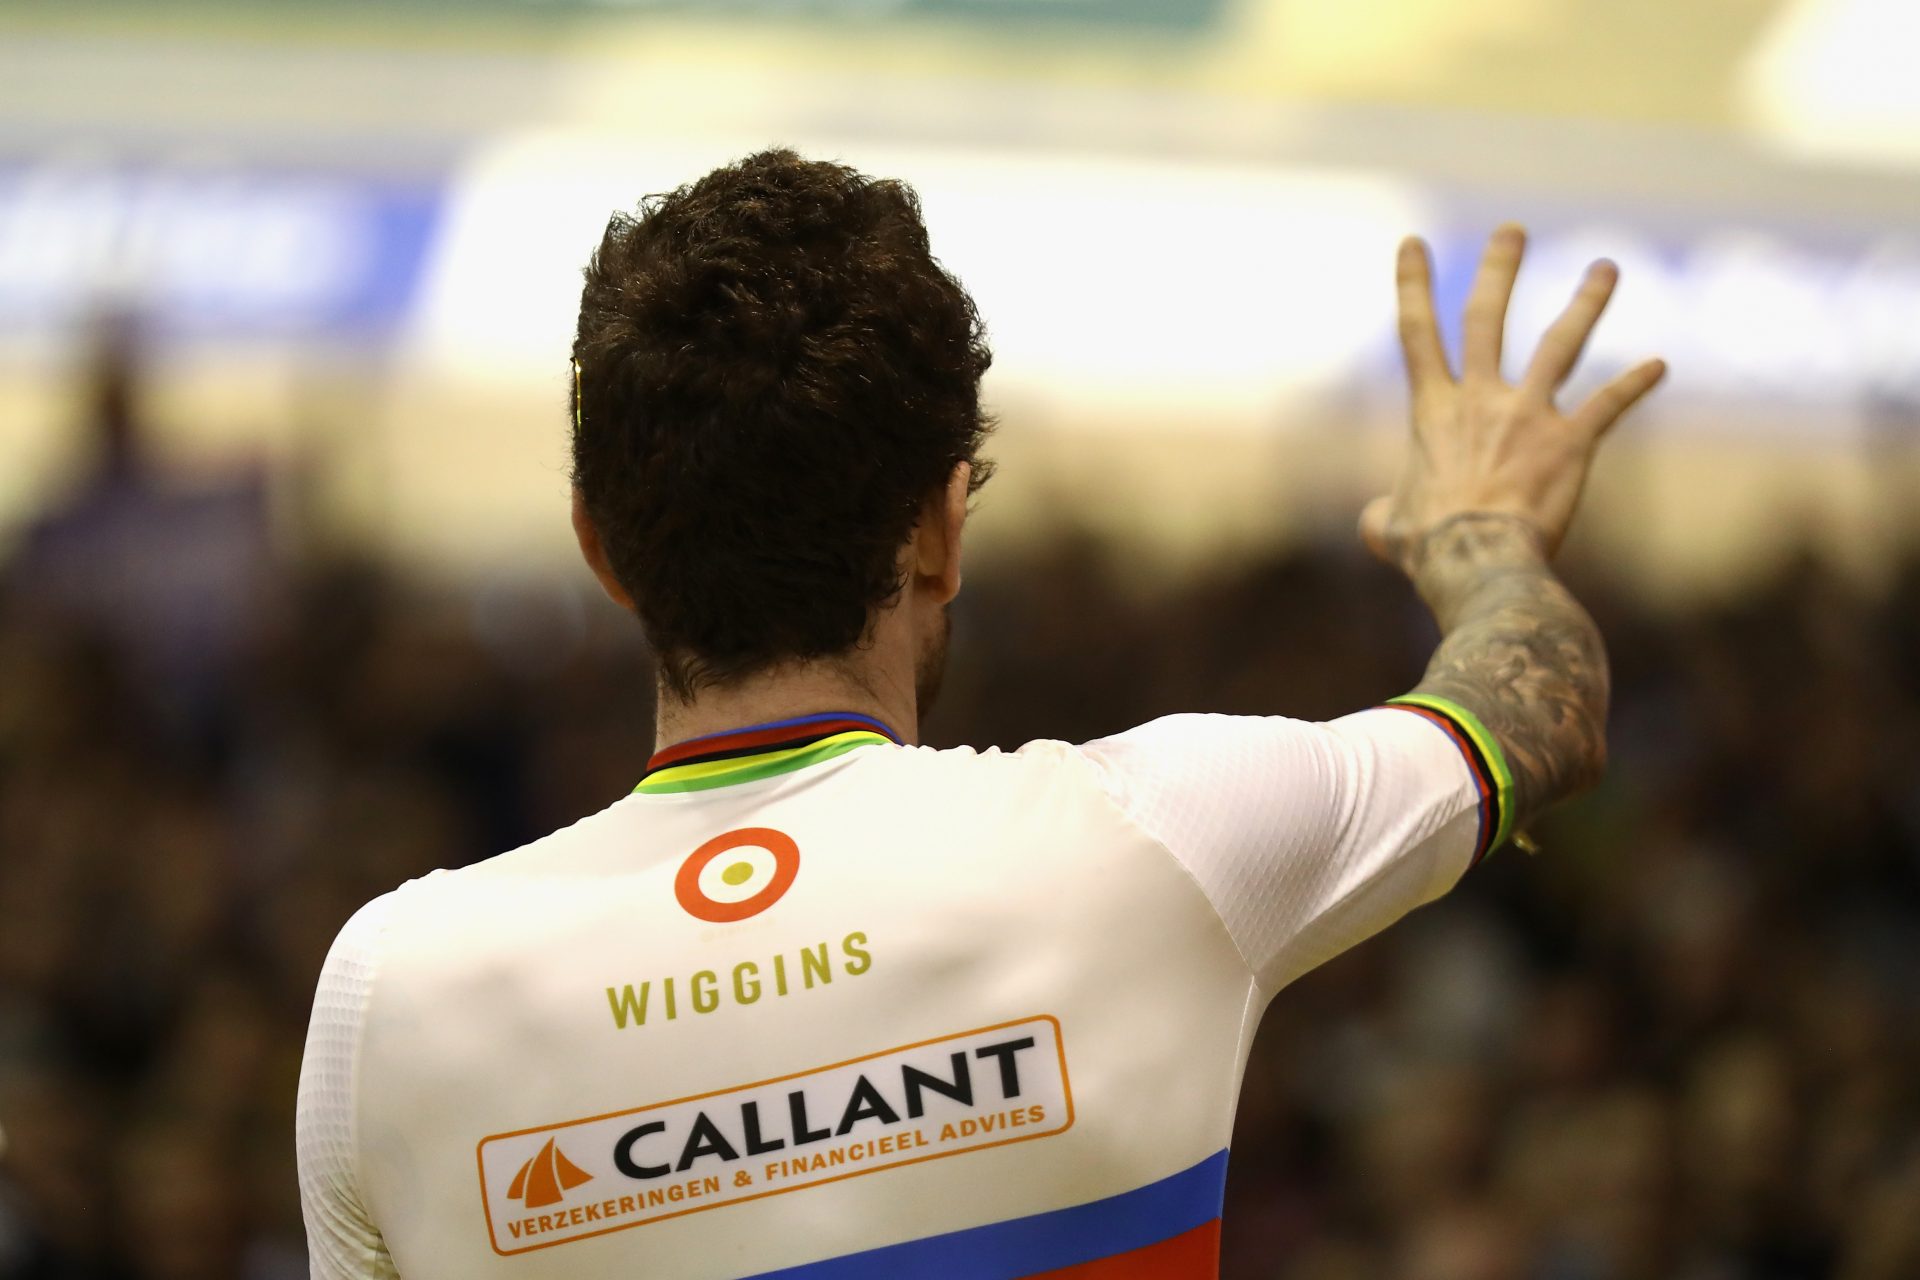 Wiggins Rights Limited